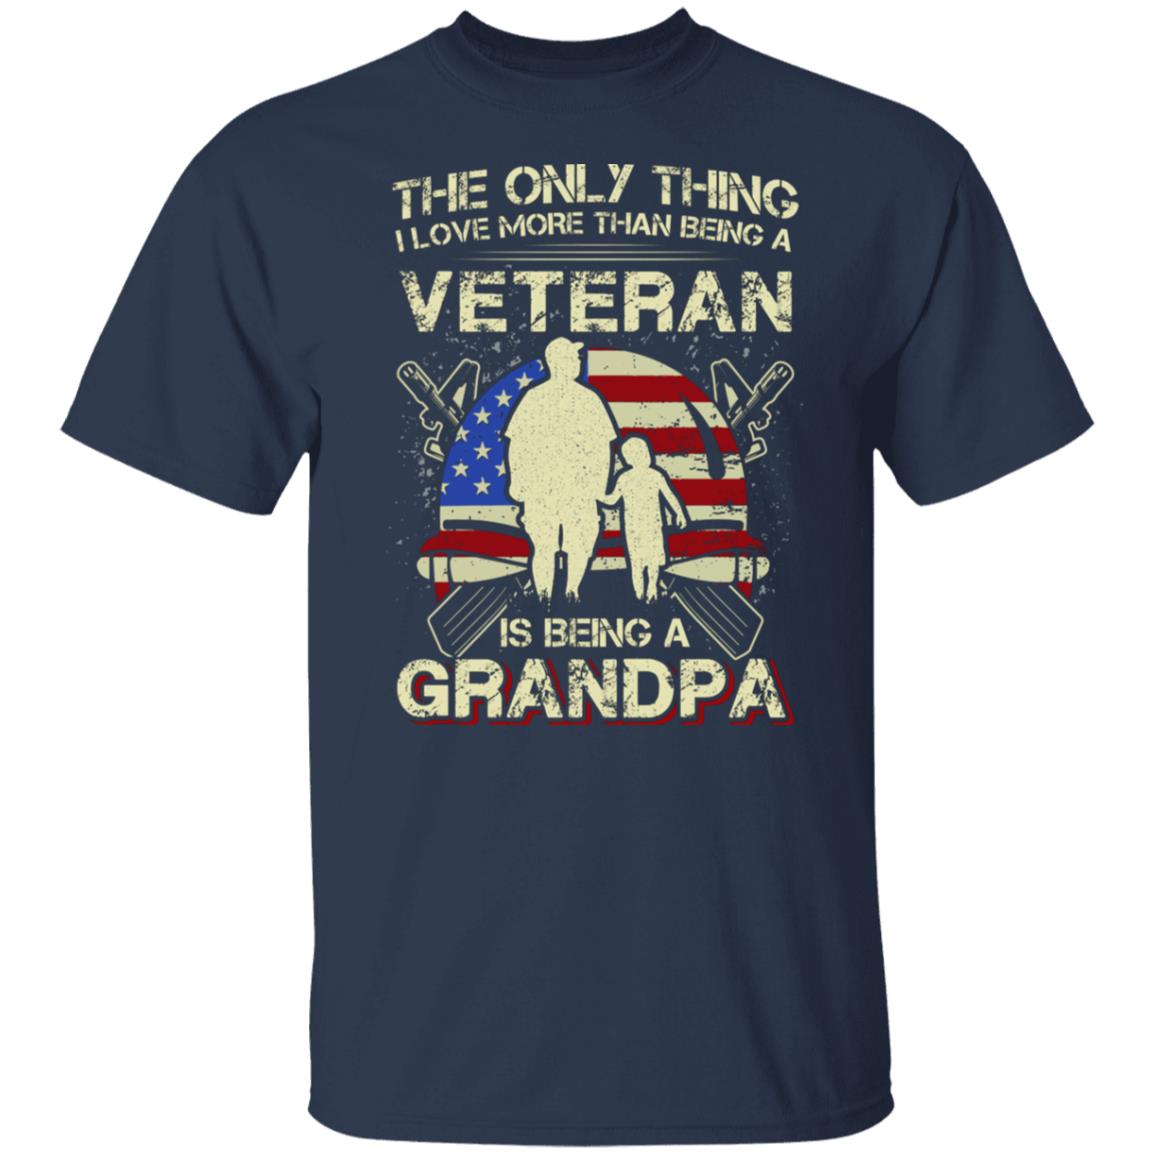 The Only thing I Love More than Being a Veteran is Being a Grandpa Veteran's Day Gift Shirt